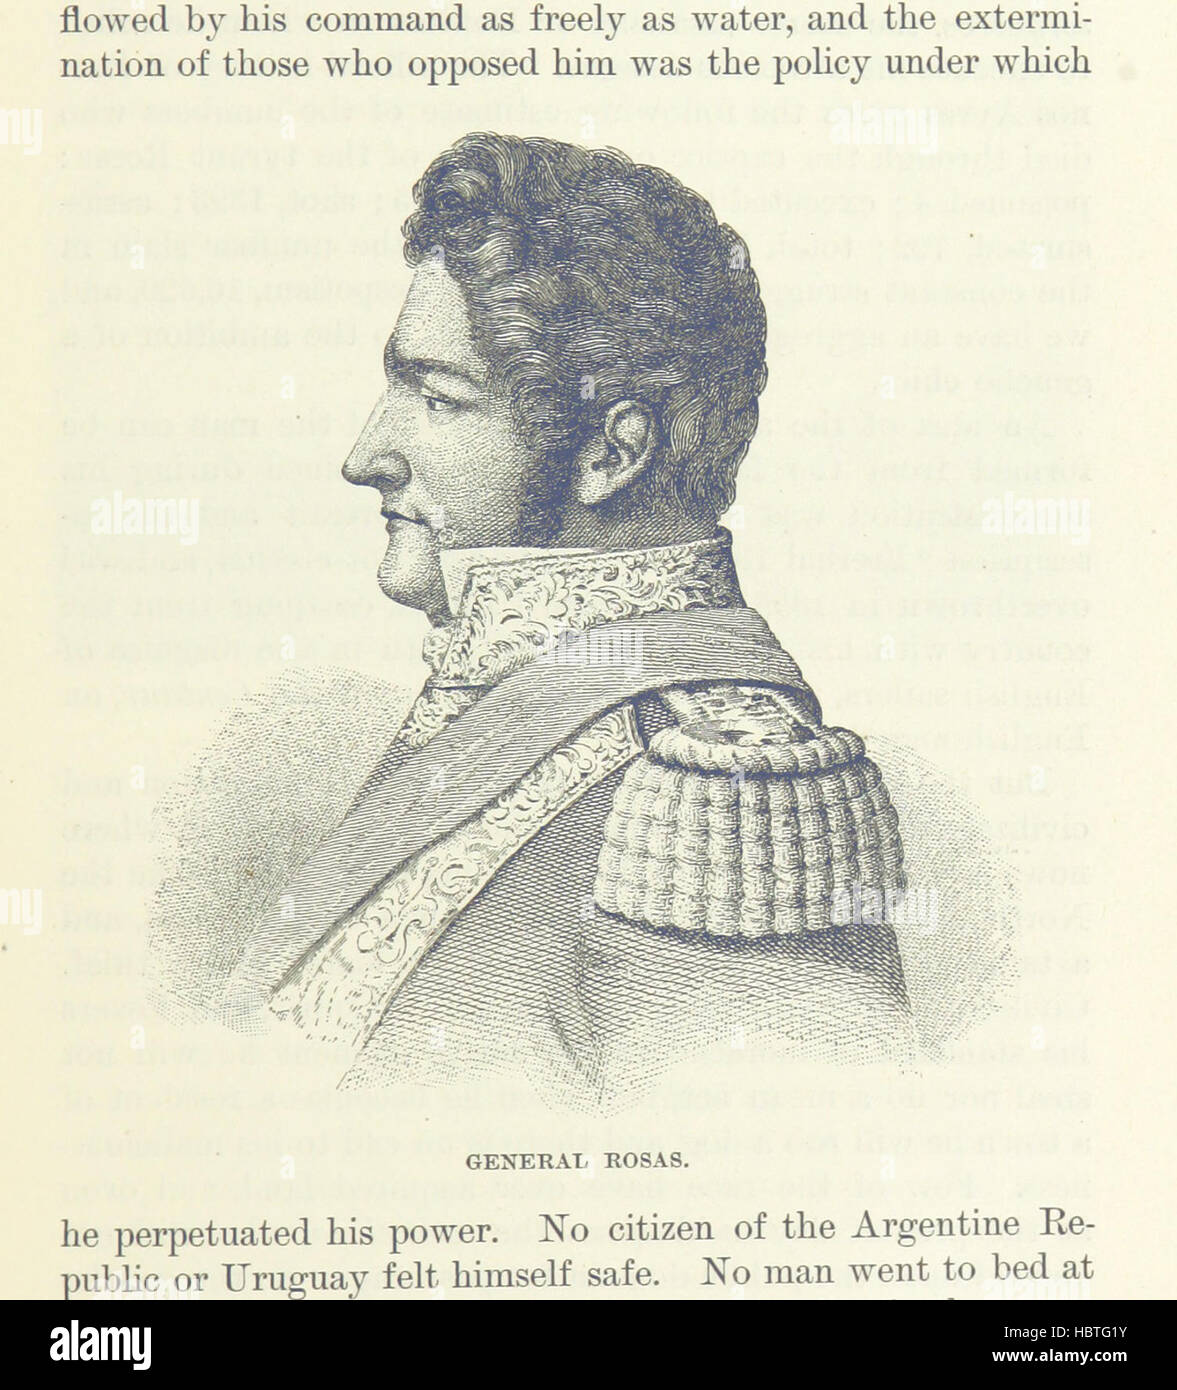 Image taken from page 597 of 'The Capitals of Spanish America ... Illustrated' Image taken from page 597 of 'The Capitals of Spanish Stock Photo